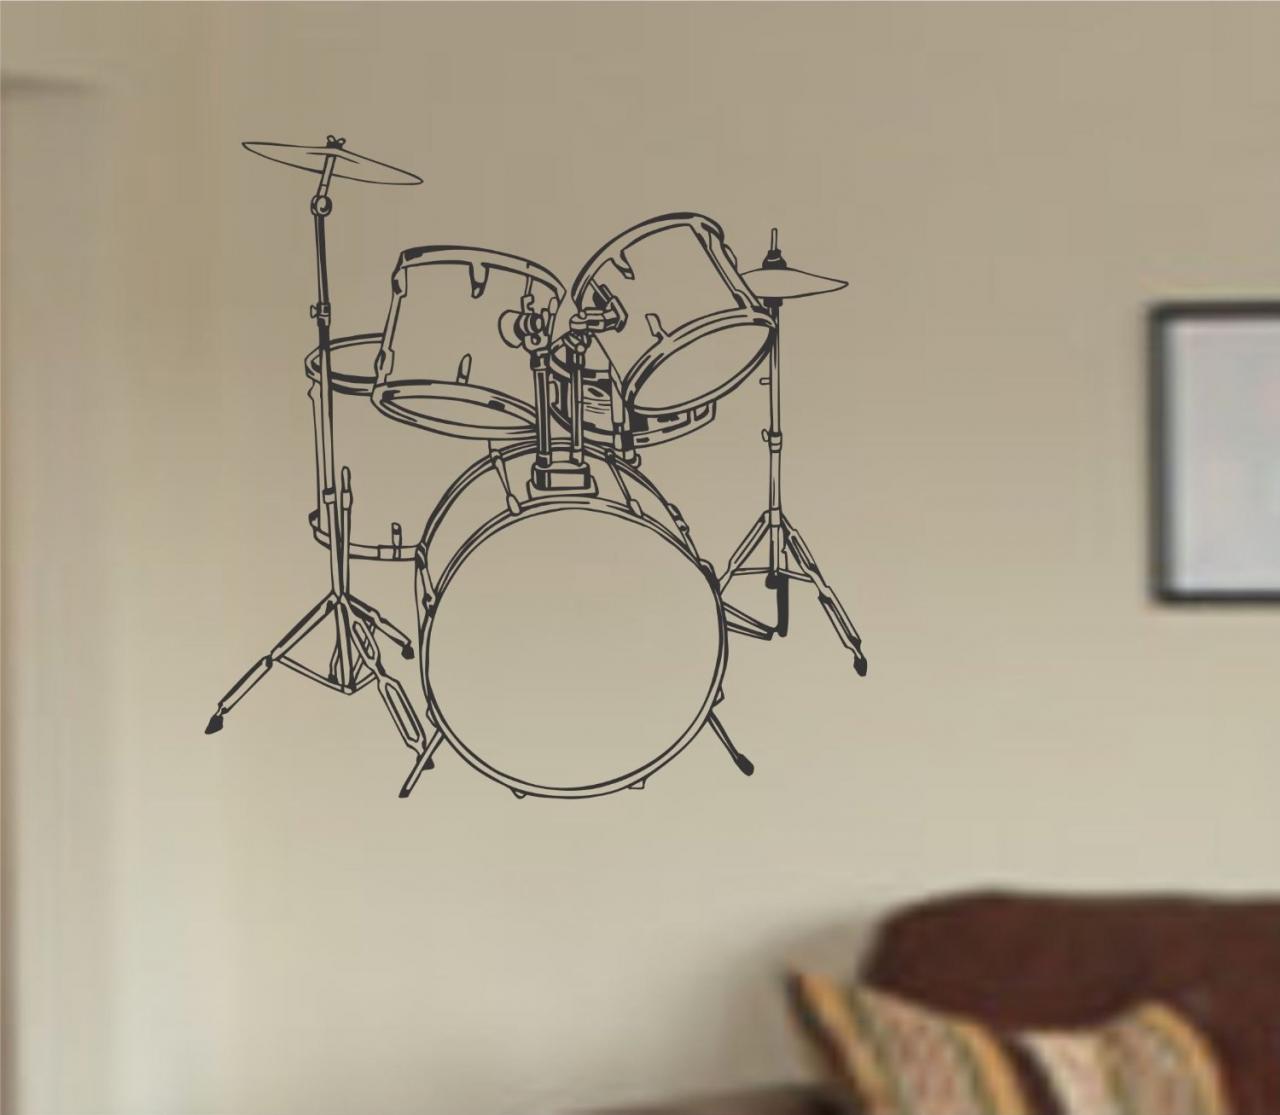 Drum Set Version 105 Wall Mural Decal Sticker Music Drums Drummer Band Drumstick Percussion I